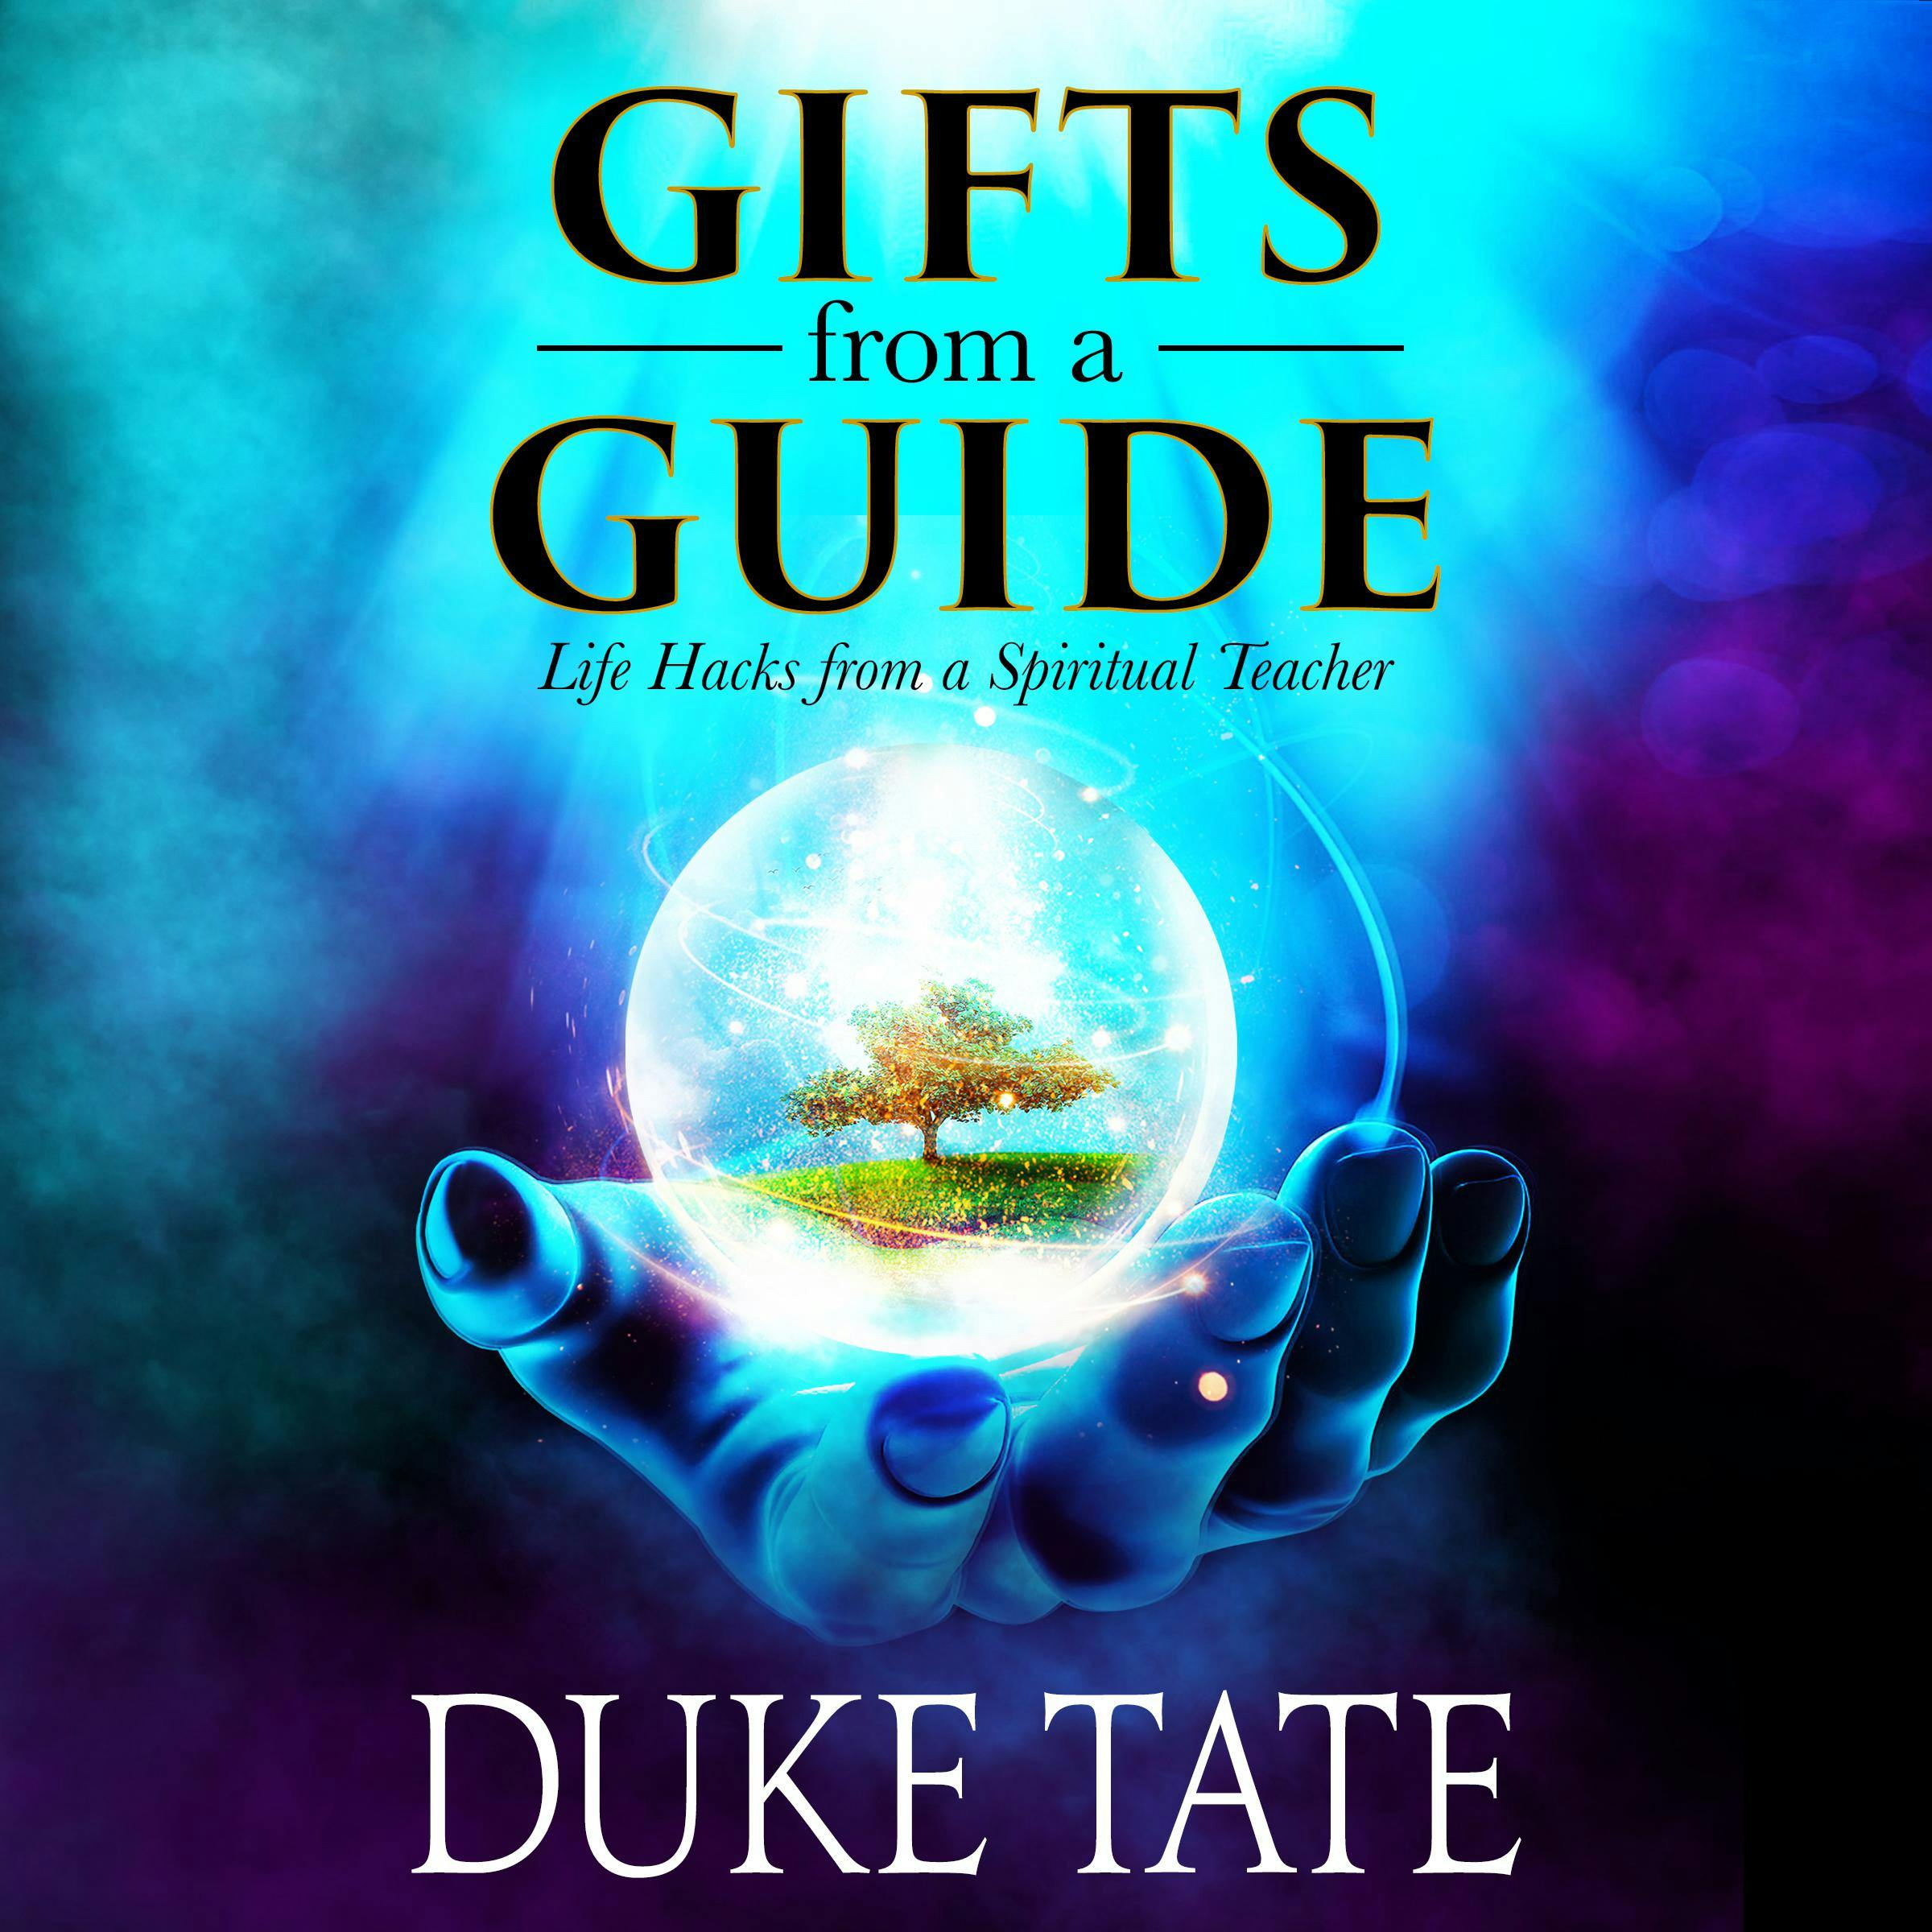 Gifts from a Guide: Life Hacks from a Spiritual Teacher - Duke Tate